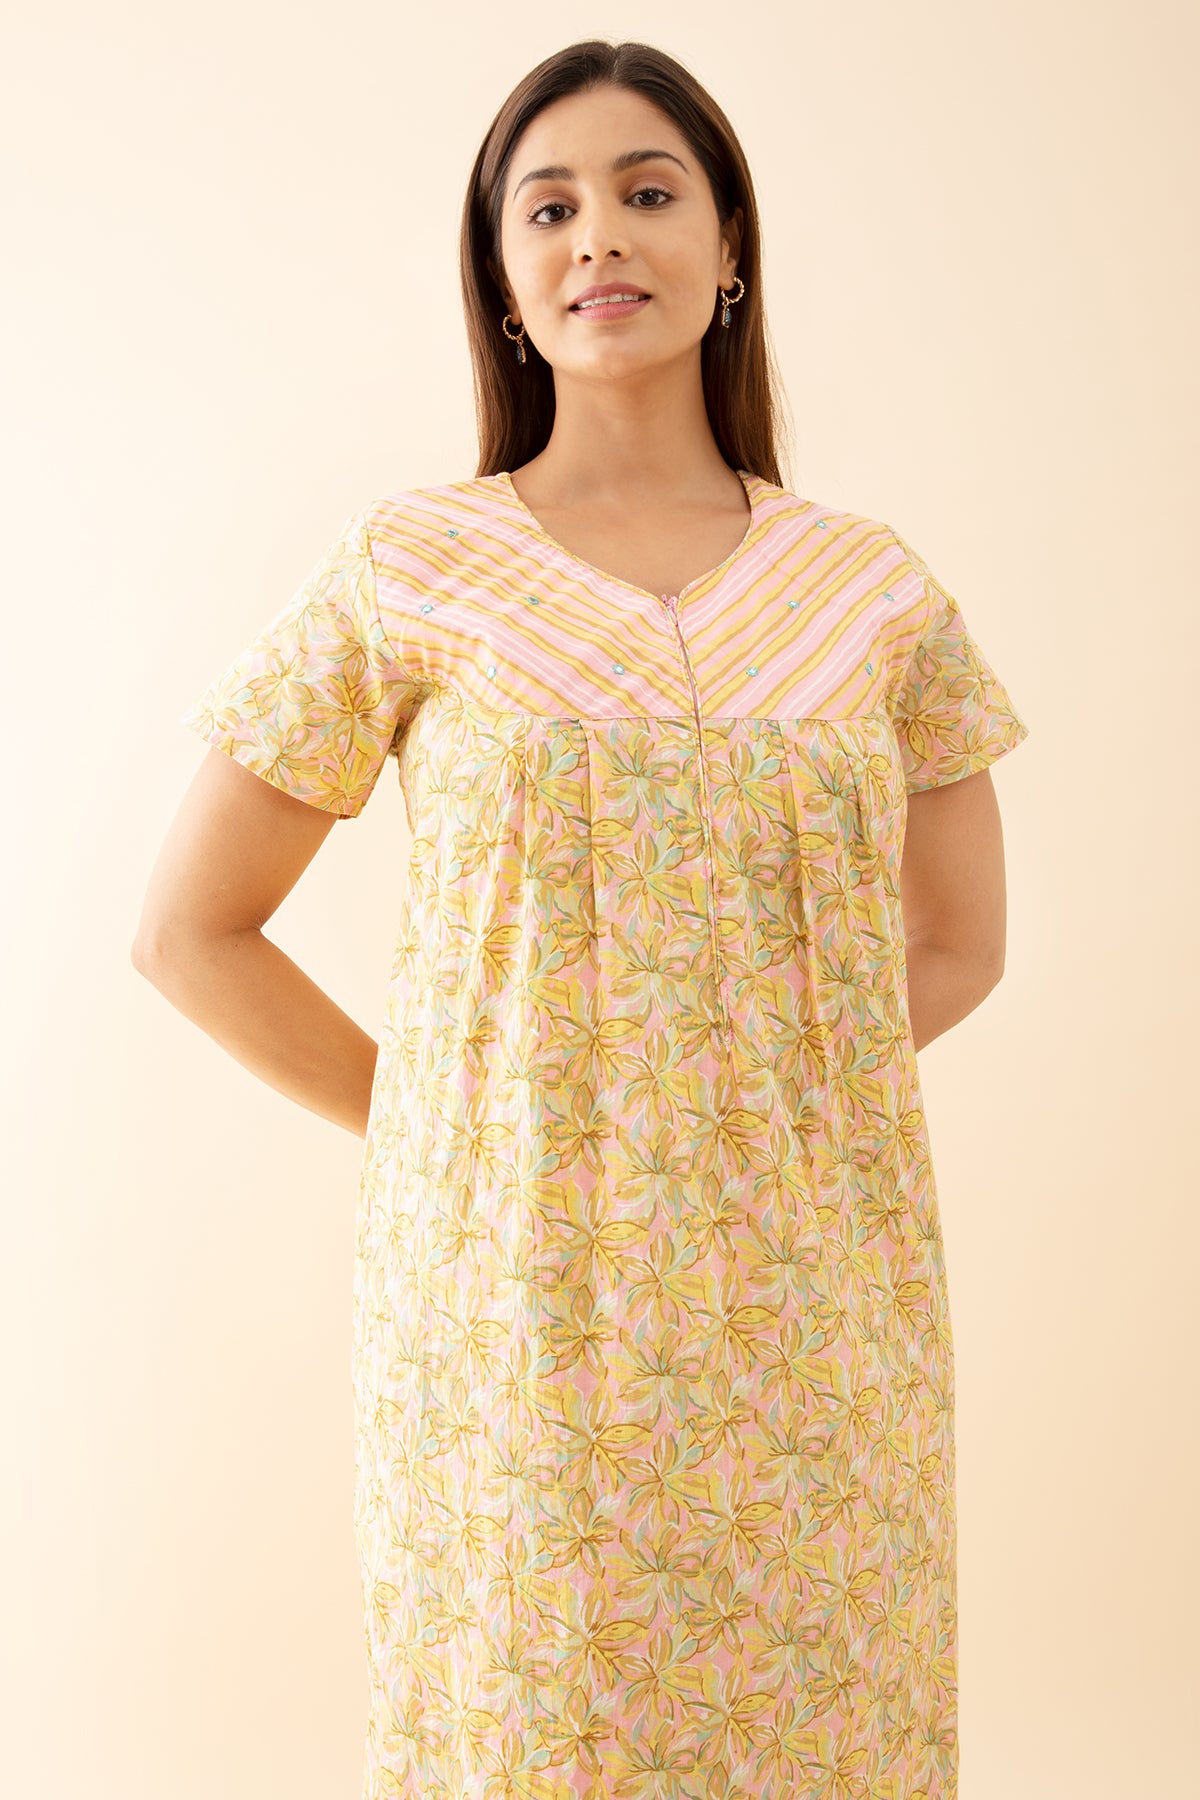 Buttercup Floral Printed Nighty with Stripes Printed Yoke - Pink